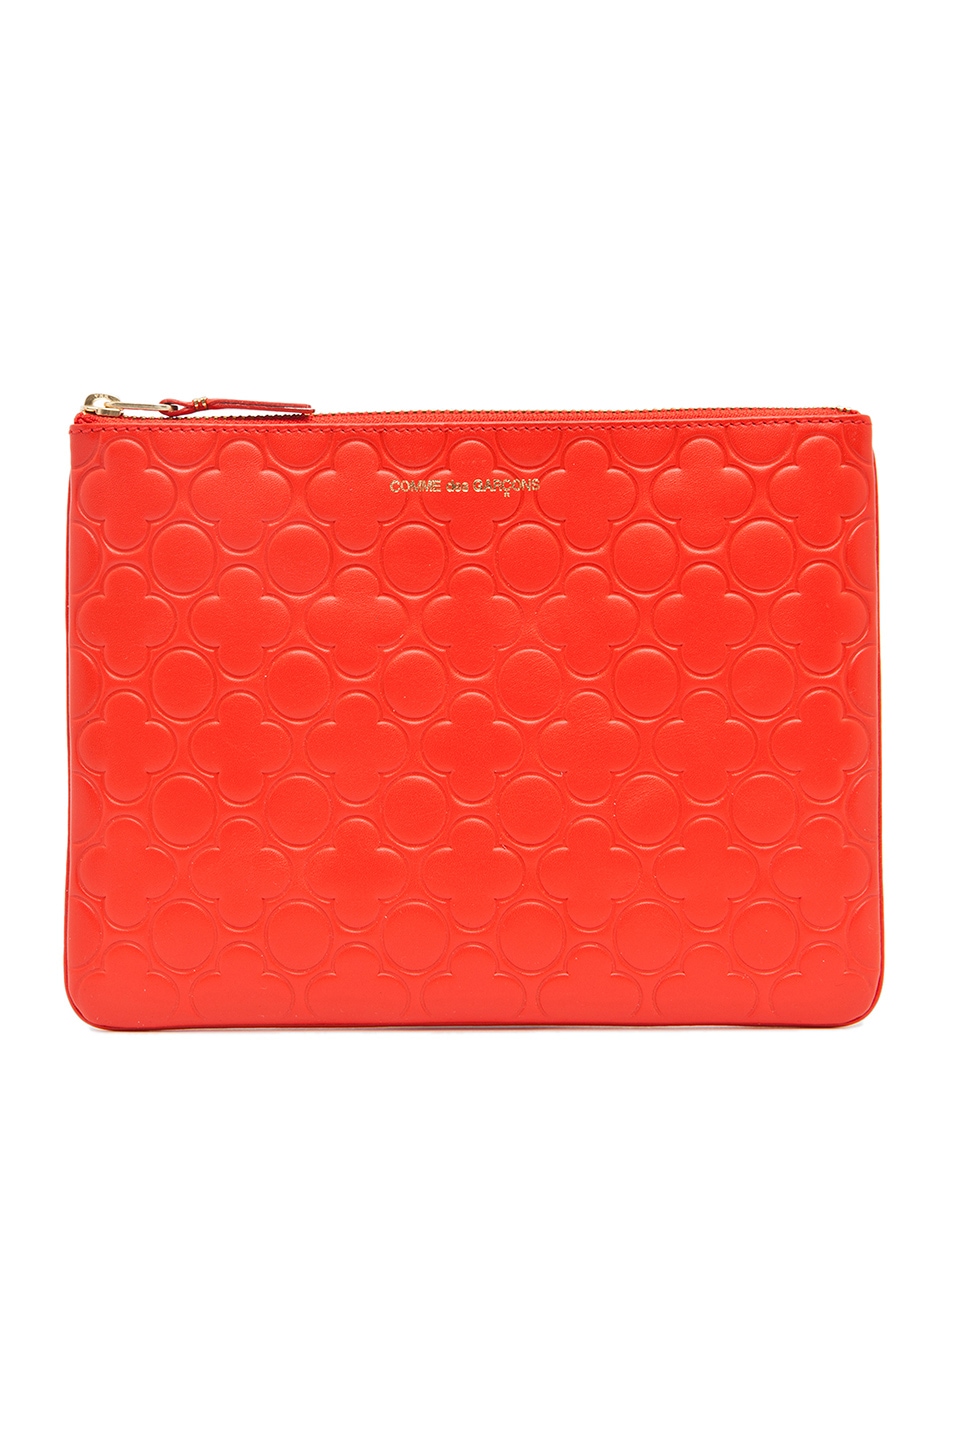 Image 1 of COMME des GARCONS Clover Embossed Pouch in Orange